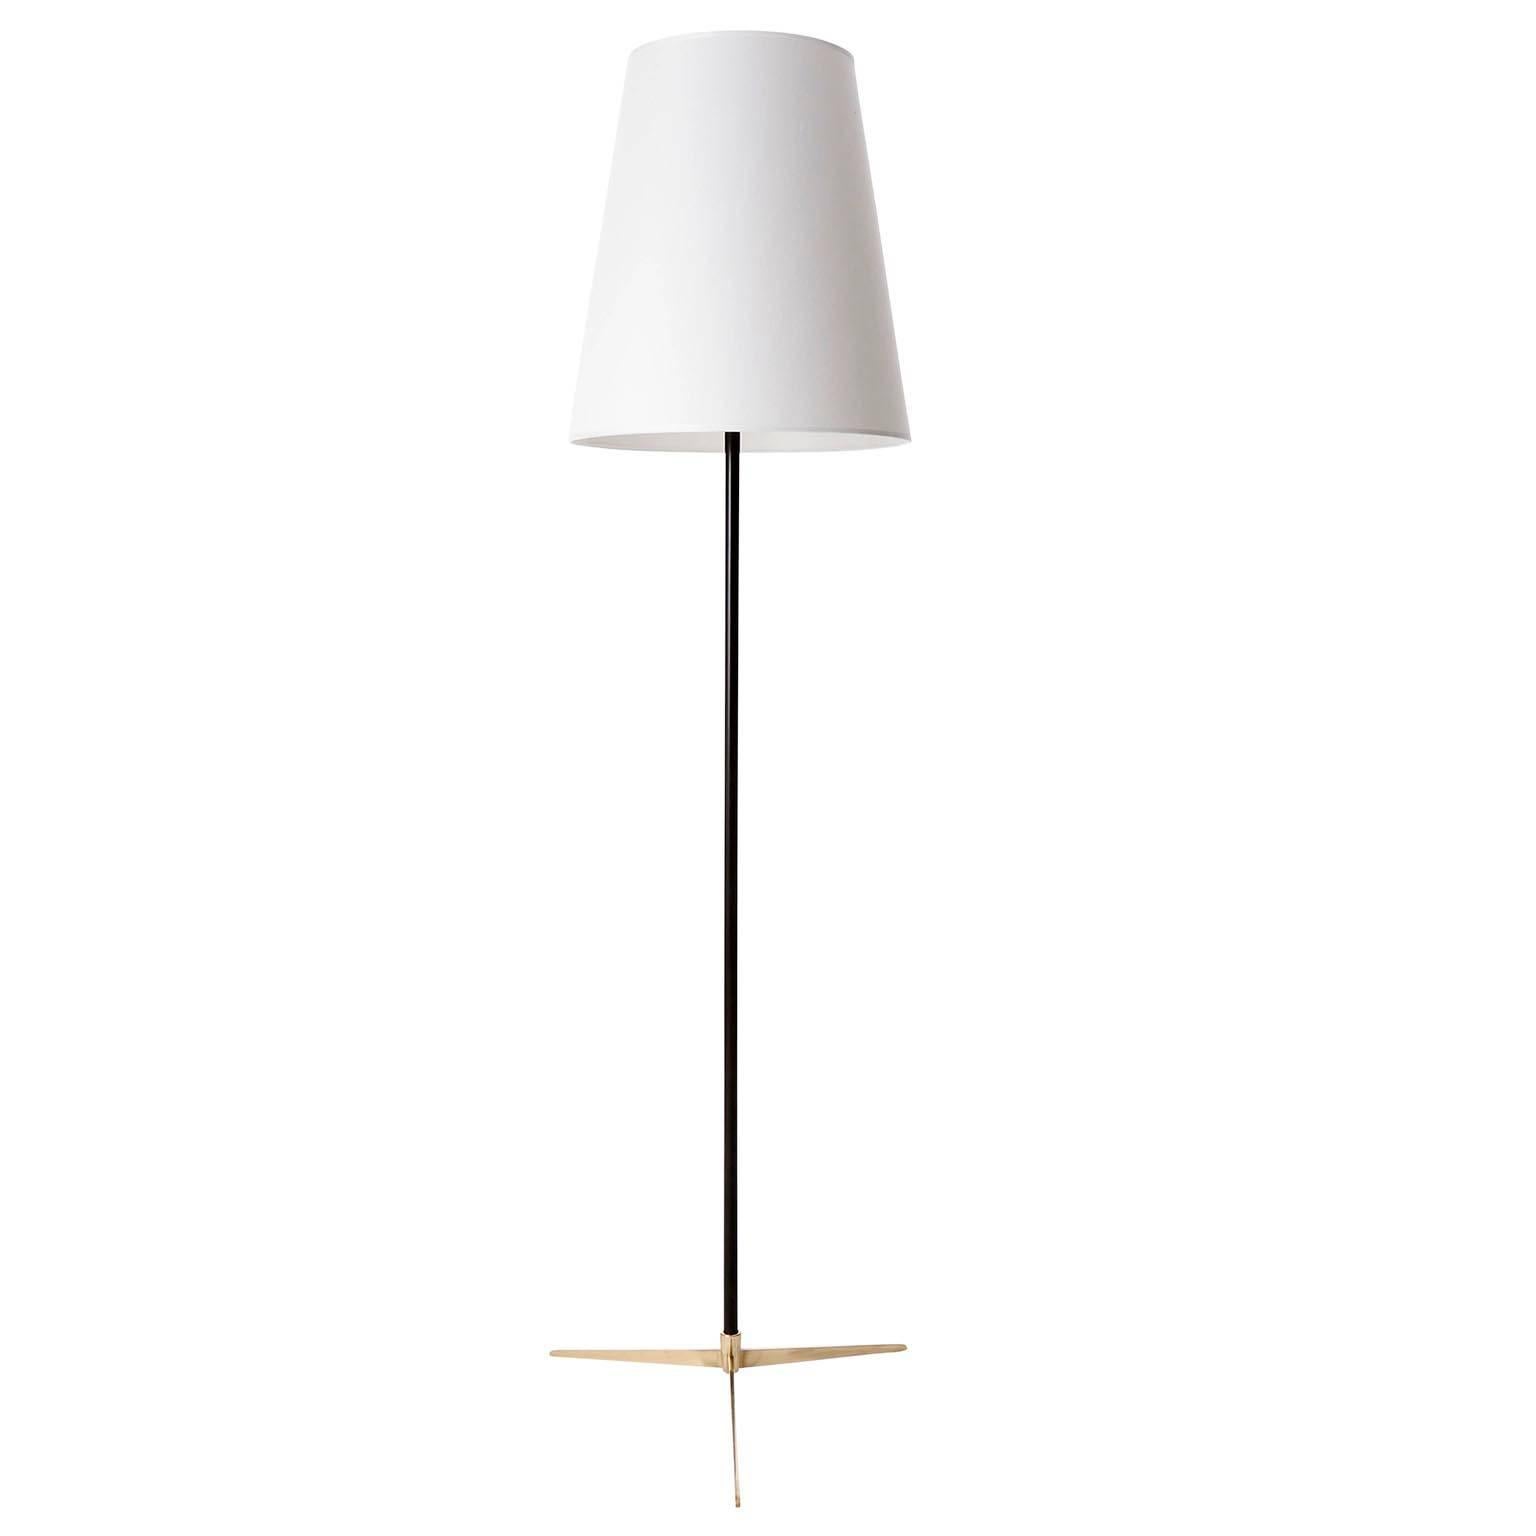 Two floor lights model 'Micheline' (model no. 2092) by J.T. Kalmar, manufactured in Mid-Century, circa 1960 (late 1950s and early 1960s).

They are made of a polished tripod brass base and a blackened metal stand. The white lamp shades have been